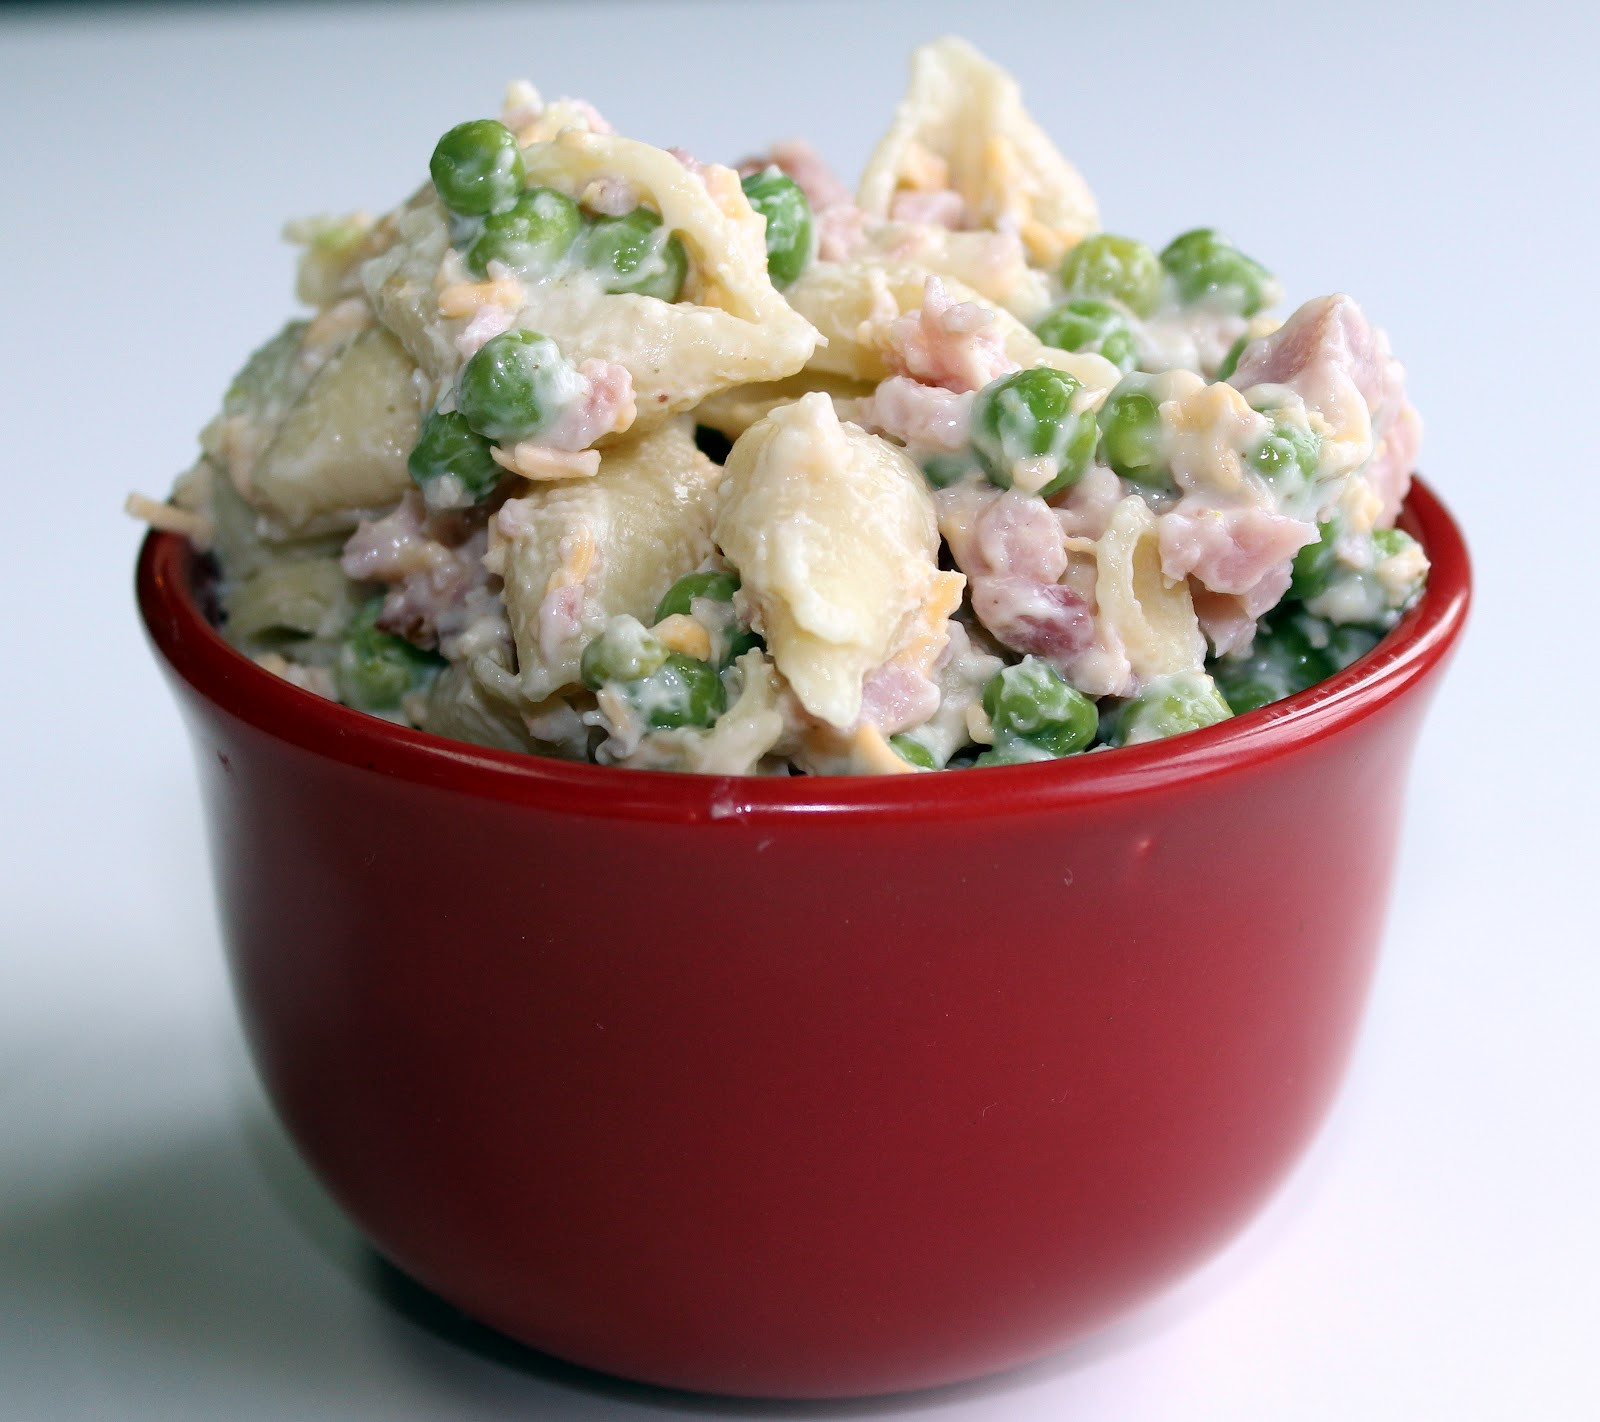 Cold Macaroni Salad With Cheese Cubes
 pasta salad with peas and cheese